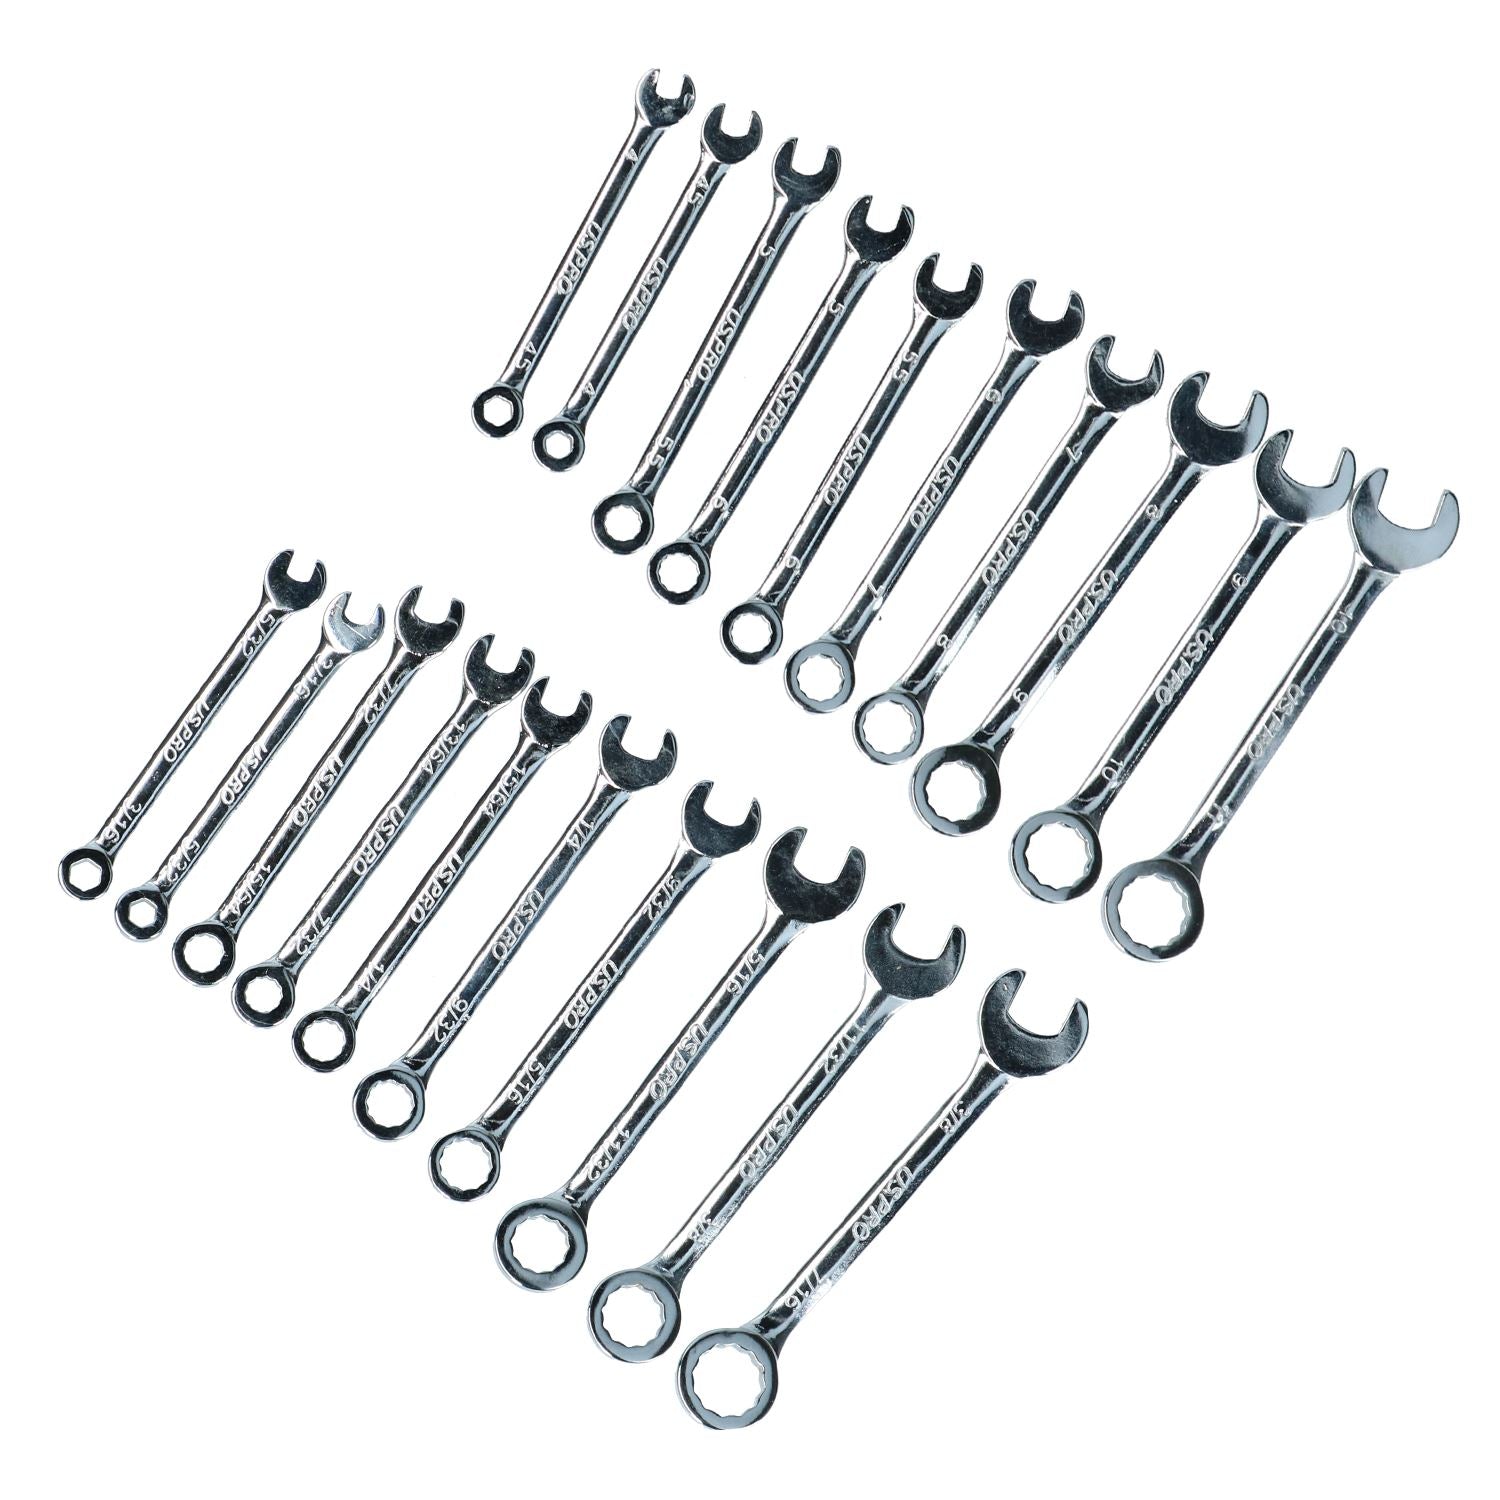 Metric and Imperial Mini Combination Spanner Set 4 - 11mm 3/16 - 7/16 20pc